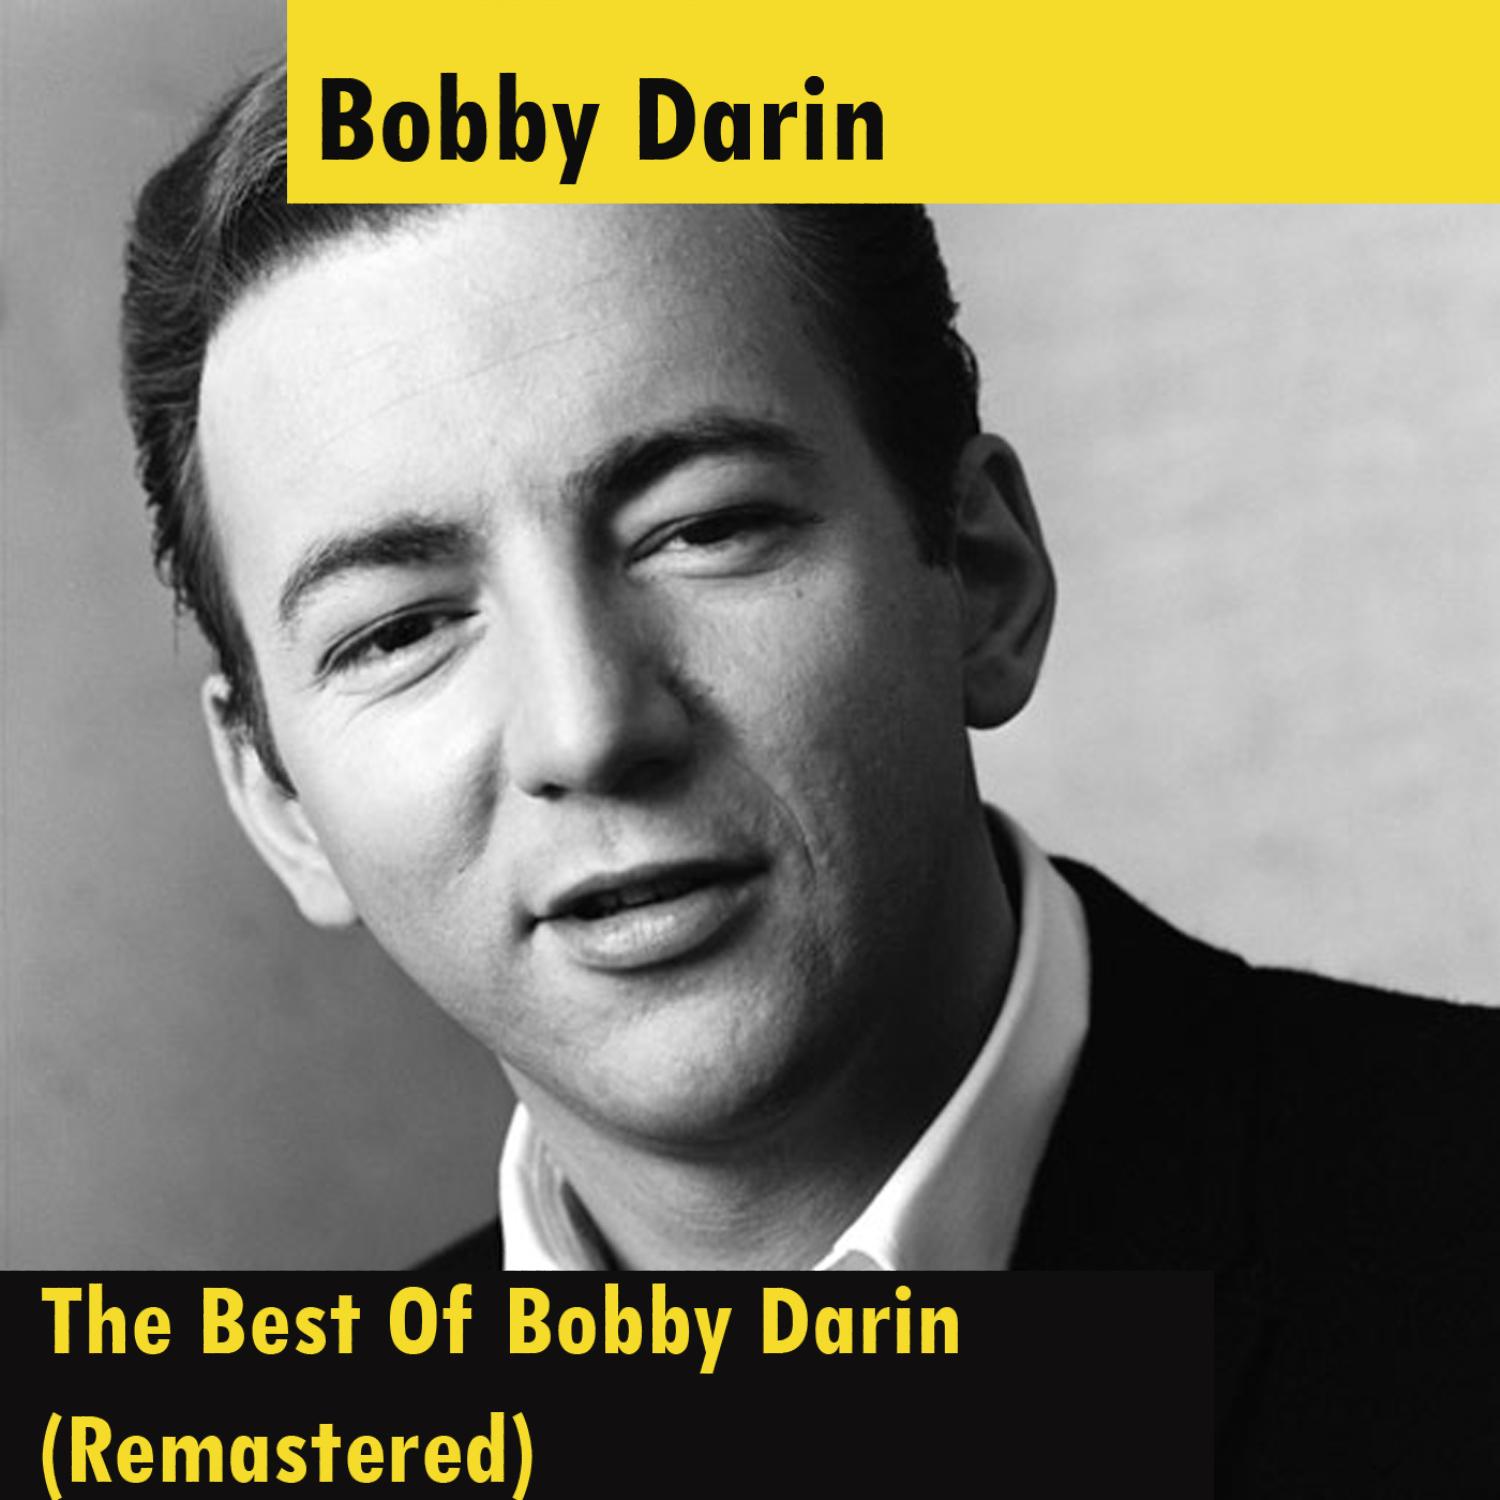 The Best Of Bobby Darin (Remastered)